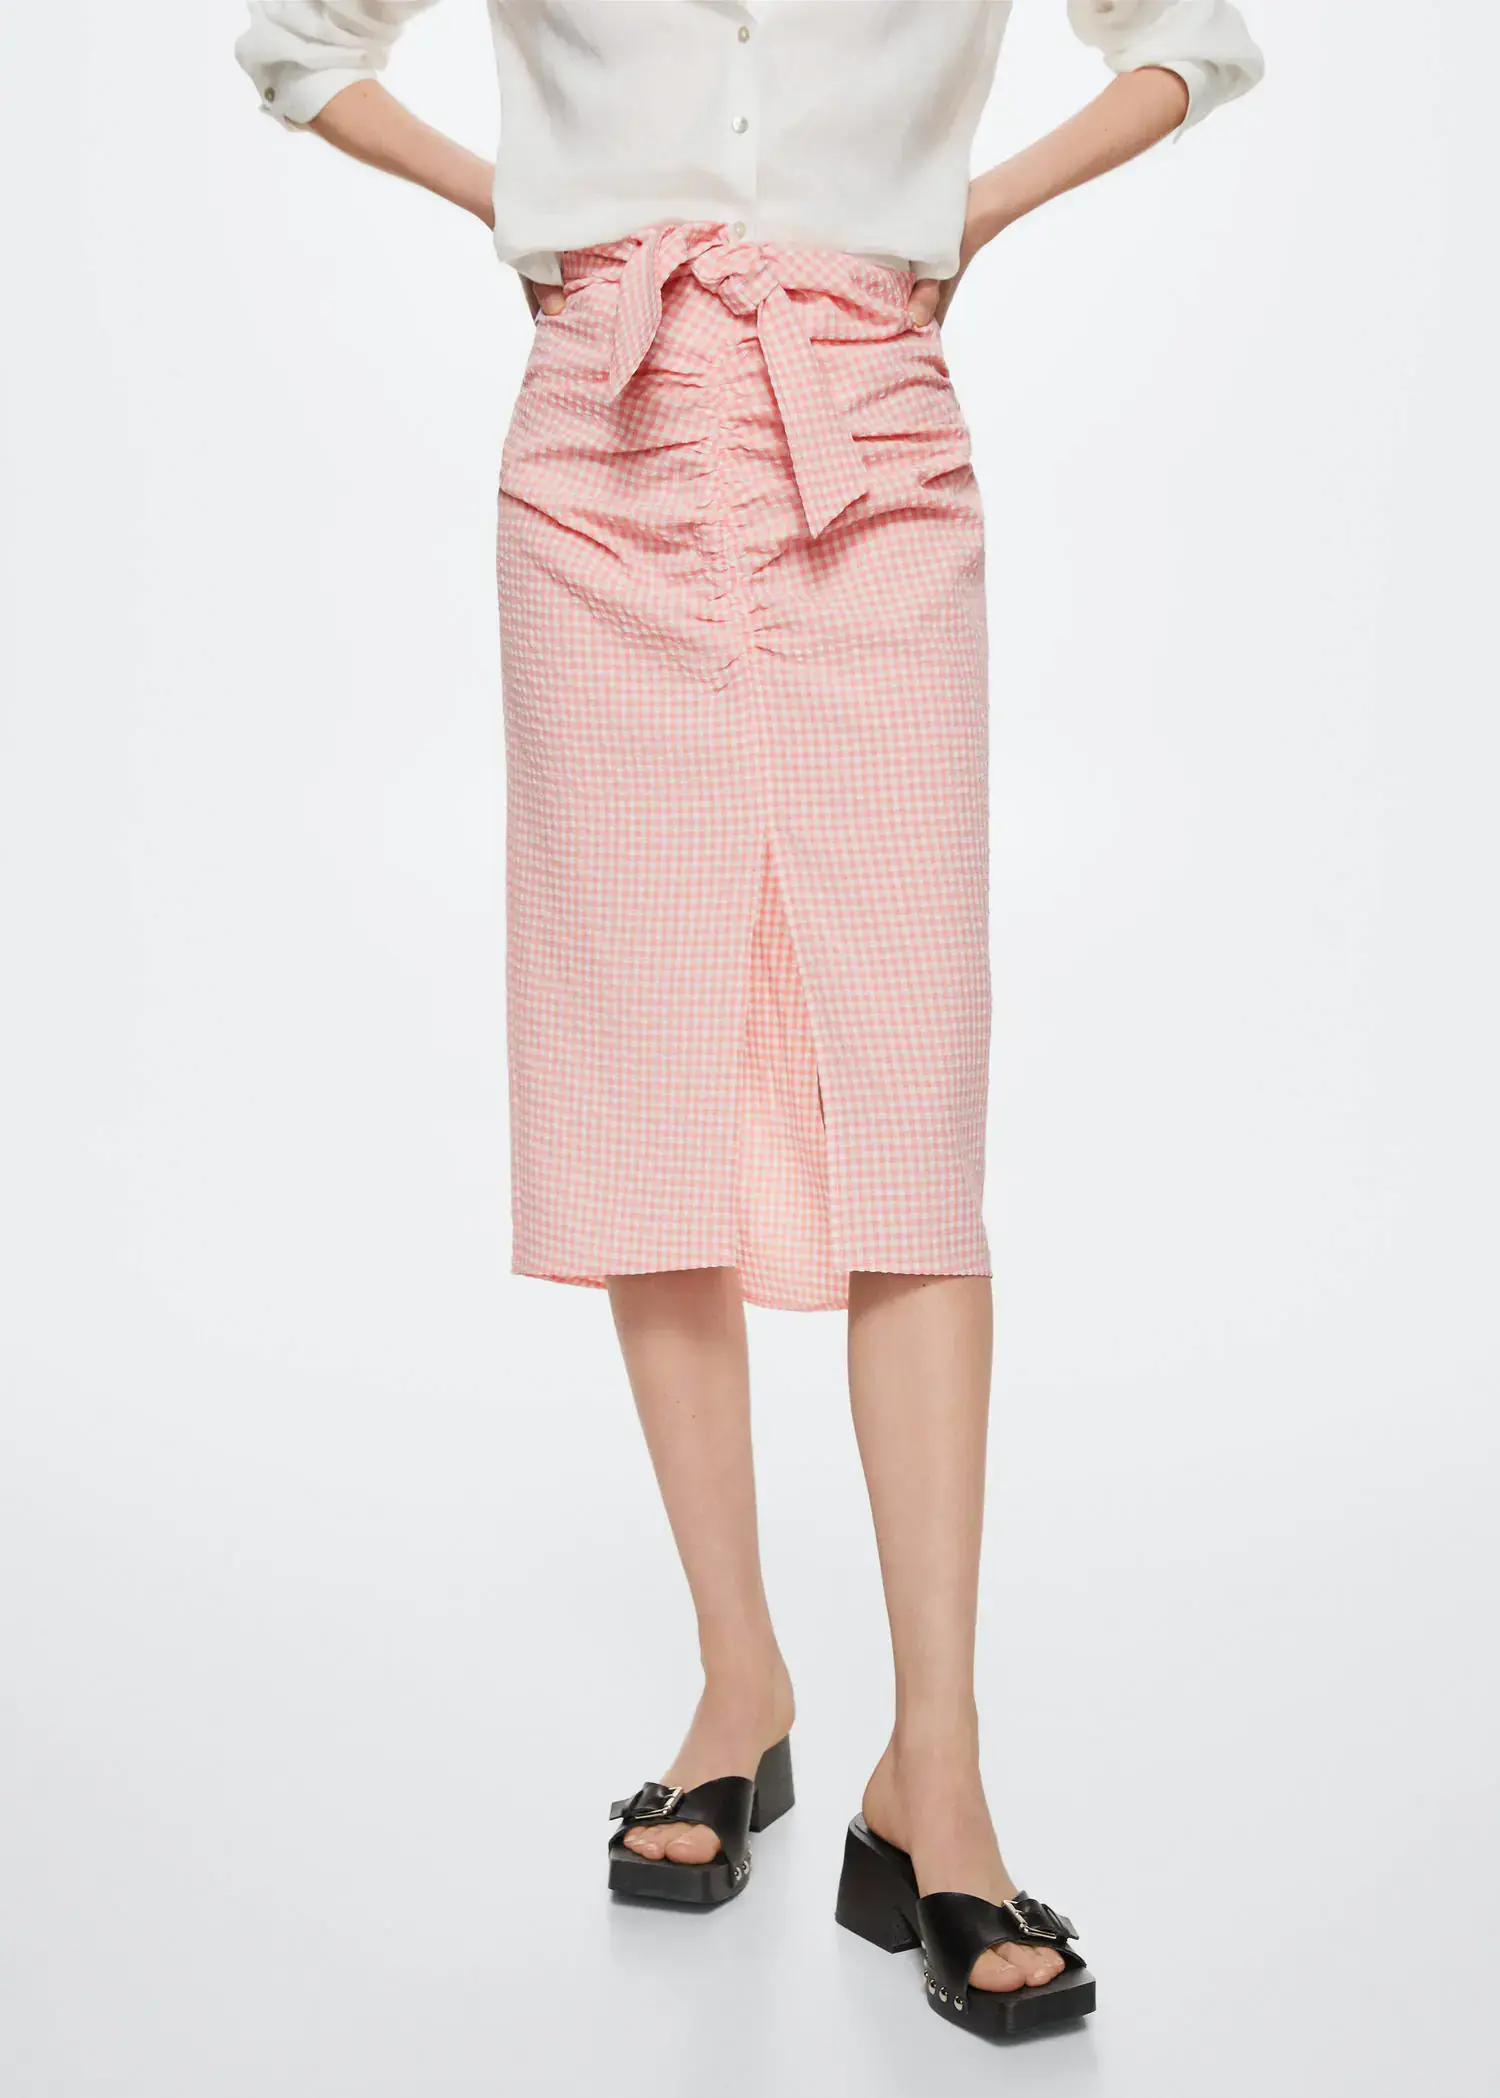 Mango Gingham pleated skirt. a woman wearing a pink skirt and black shoes. 